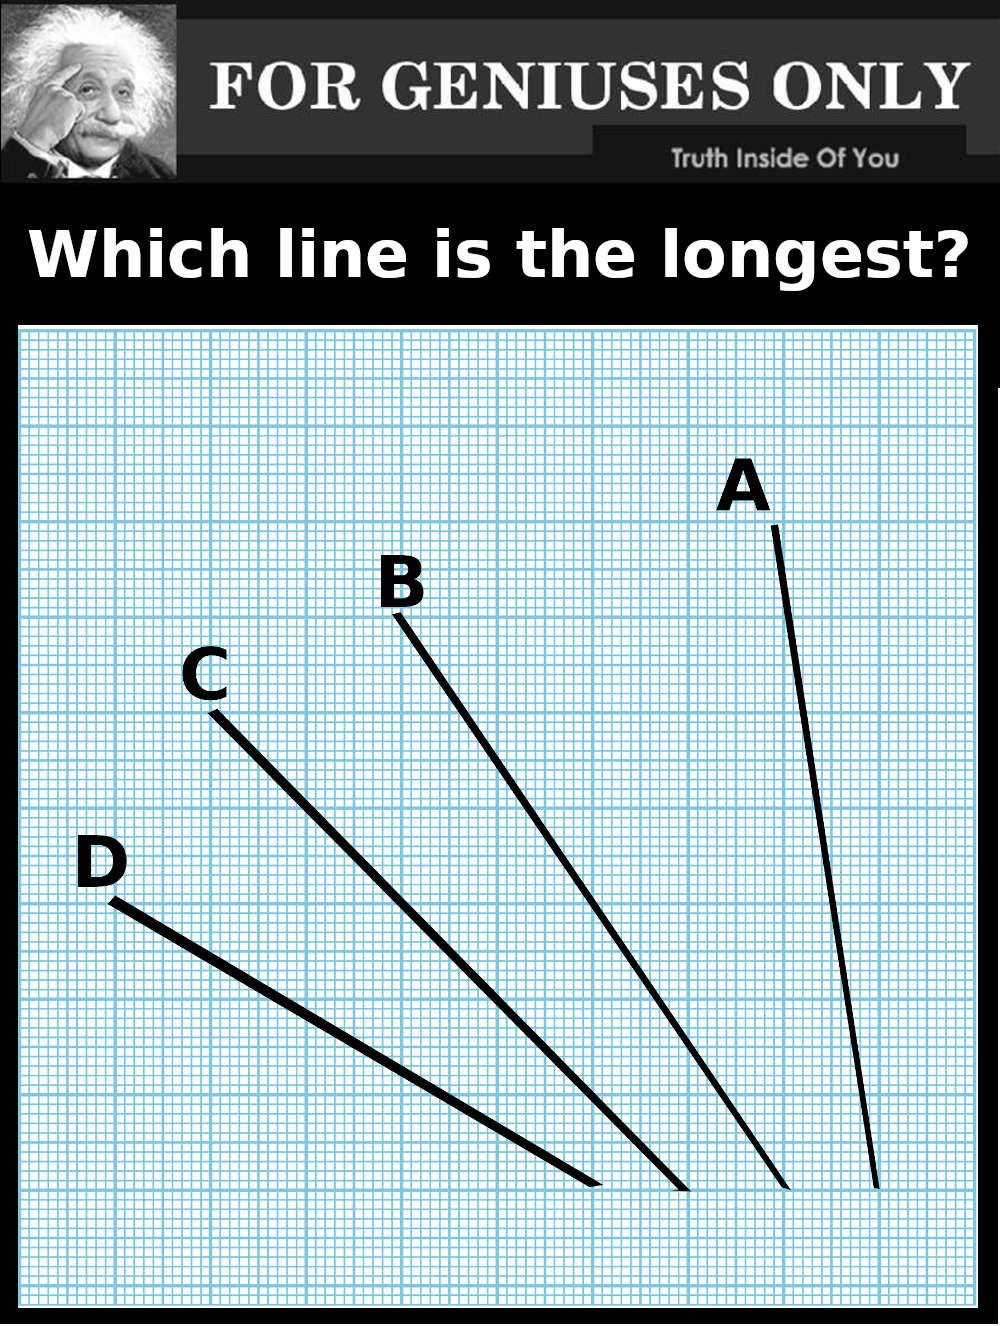 which line is the longest?